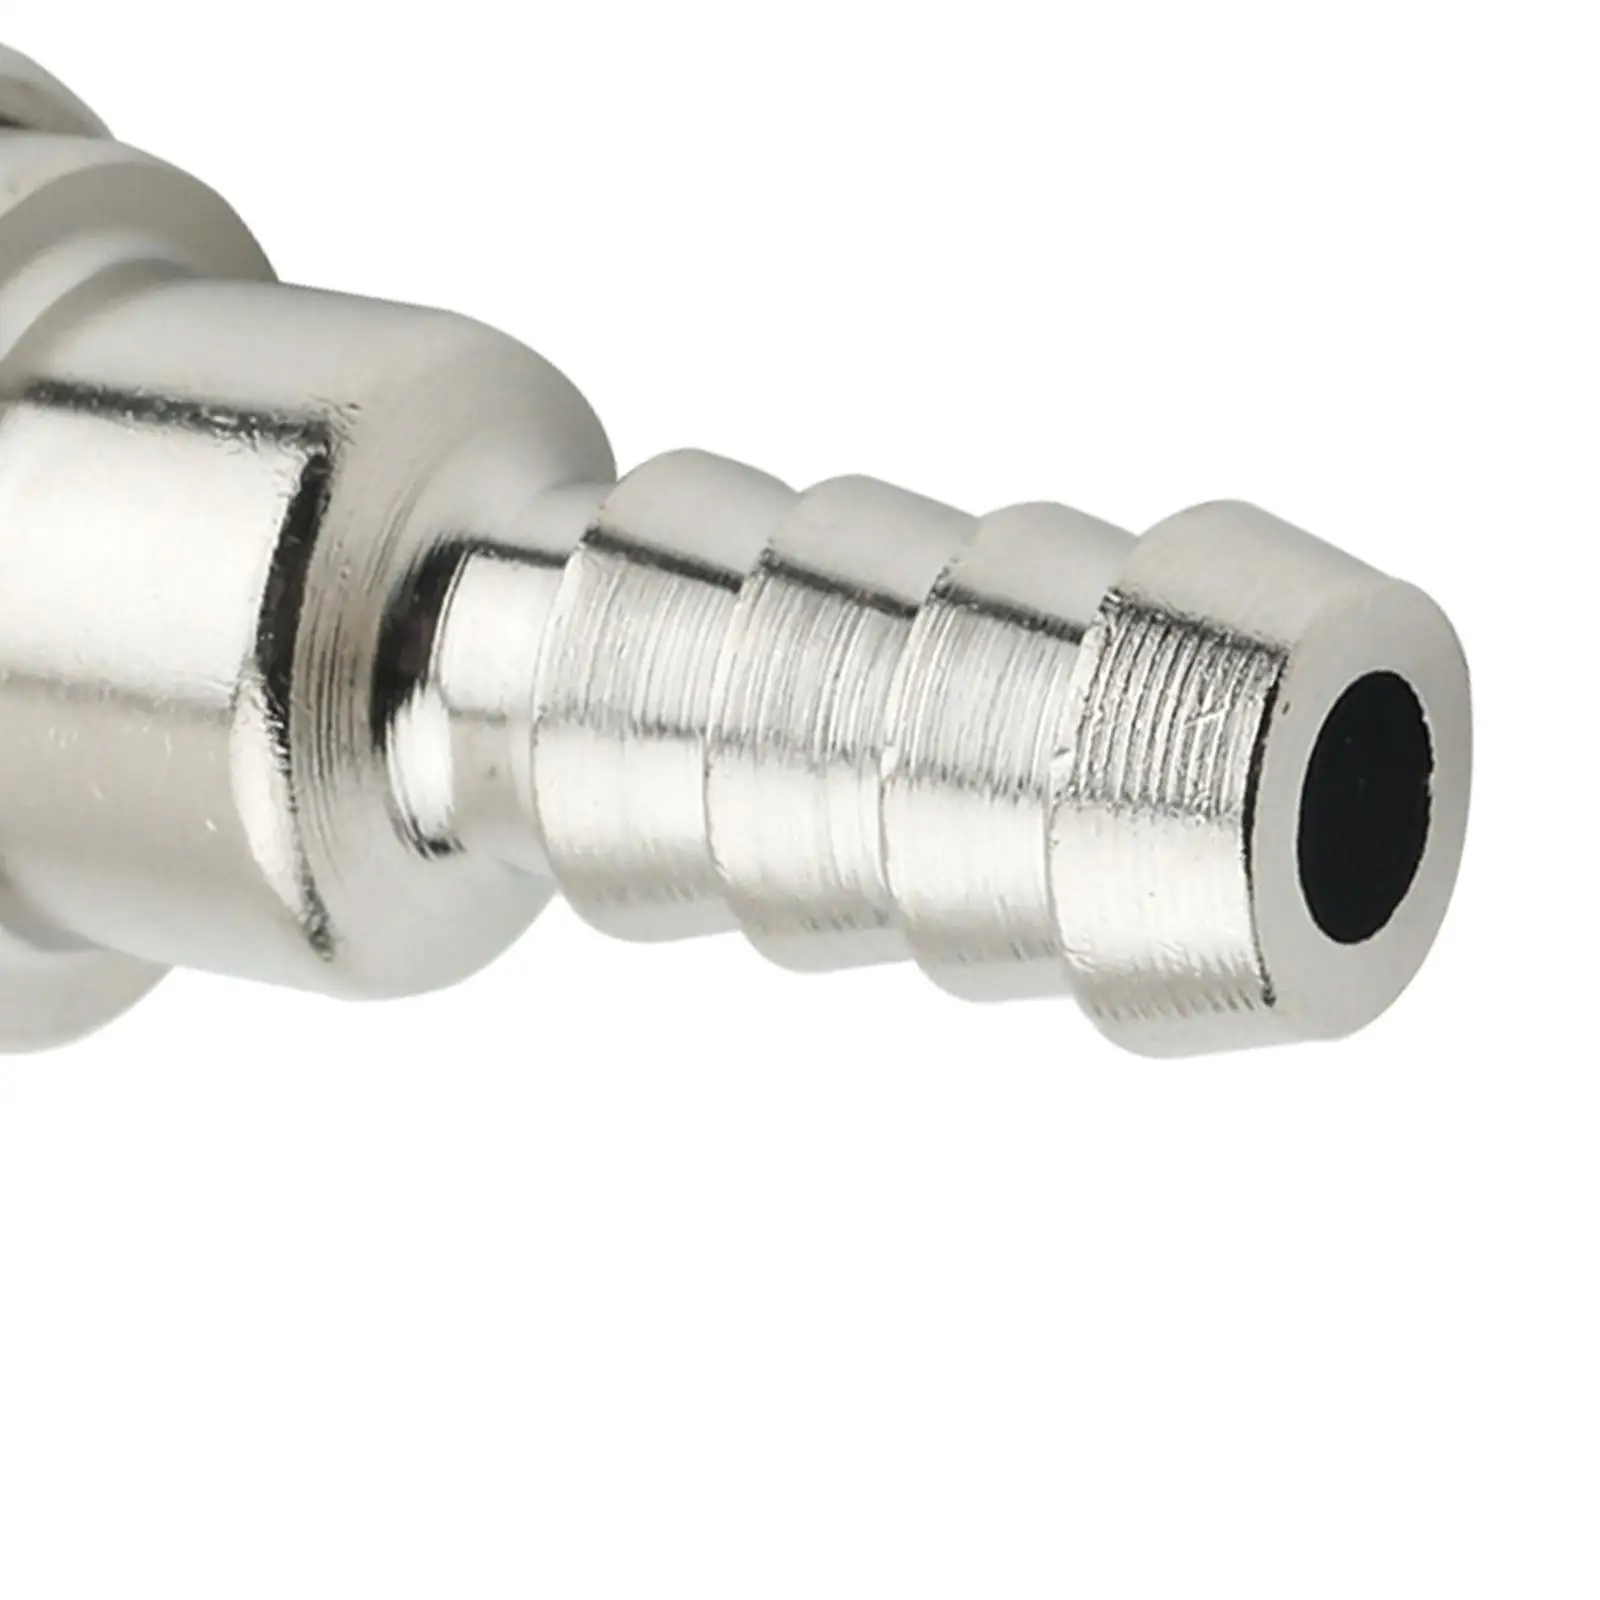 Fuel Connector 3B2-70250 Replace Part 5/16